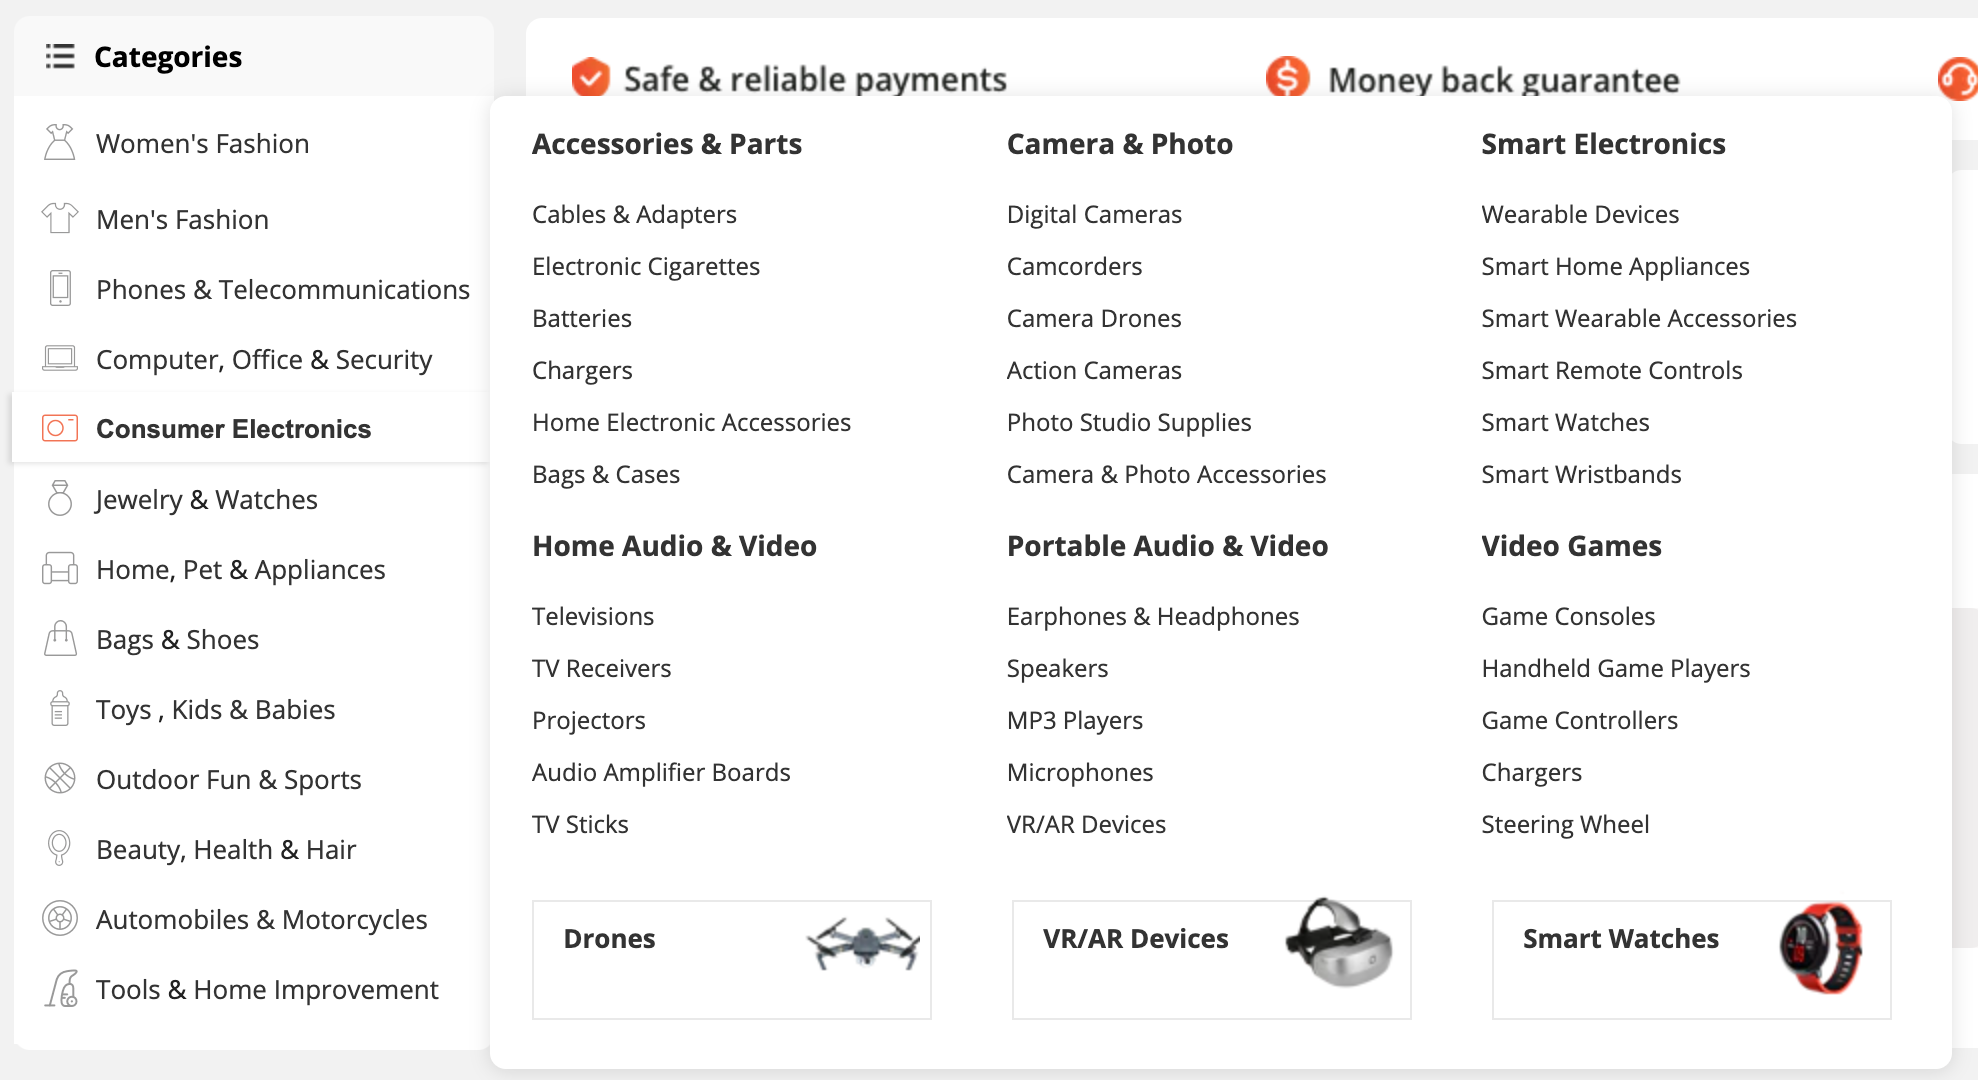 AliExpress categories menu with icons to represent each category